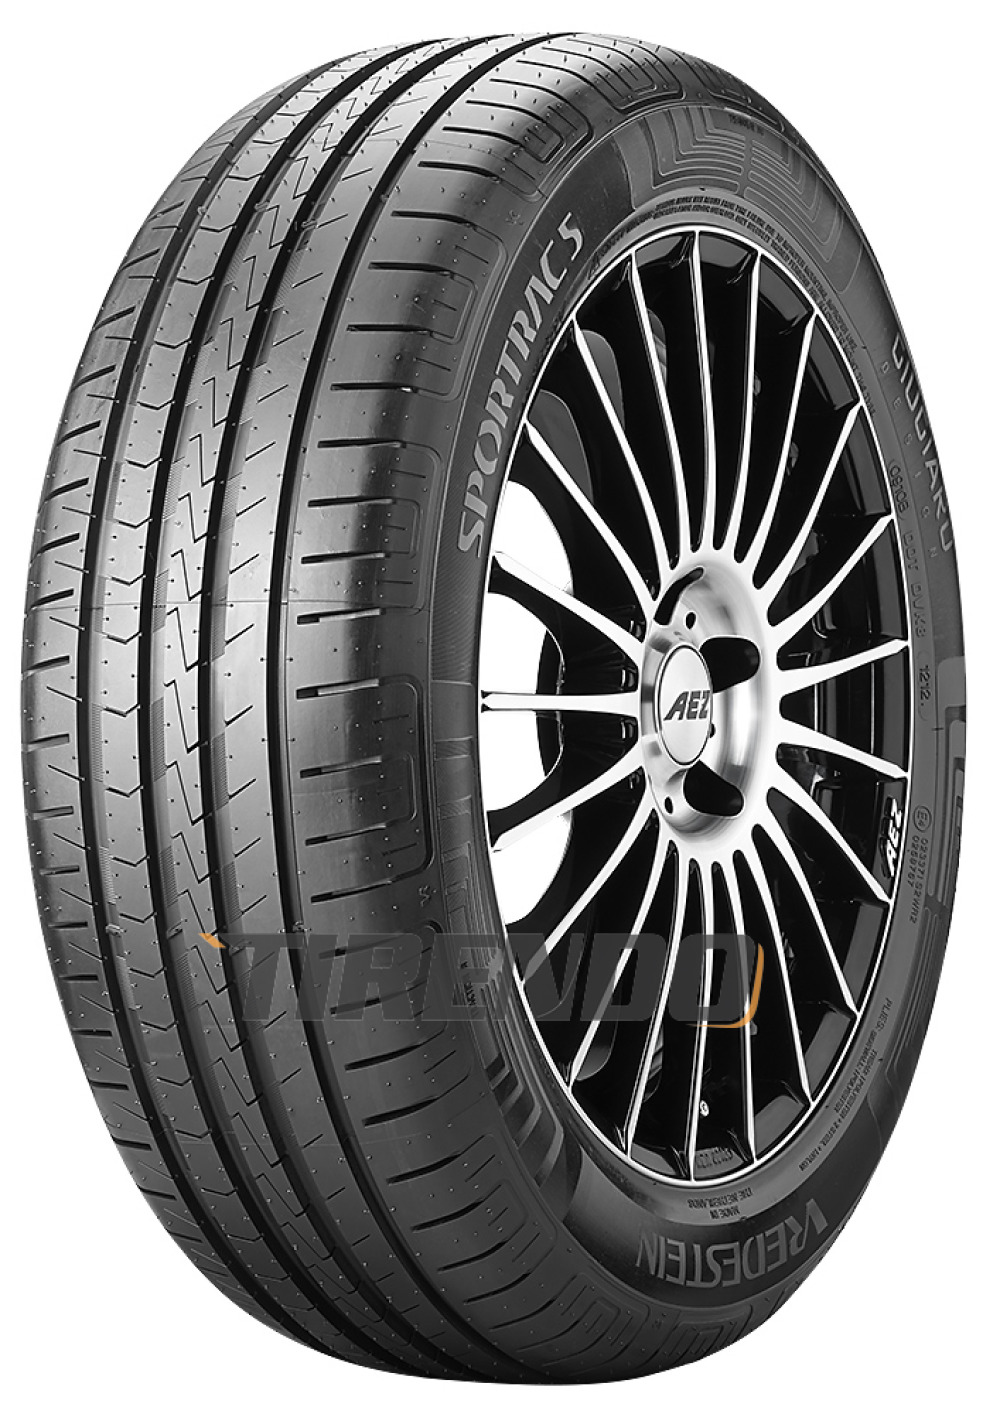 Vredestein Sportrac 5 - Tire Tests and Reviews